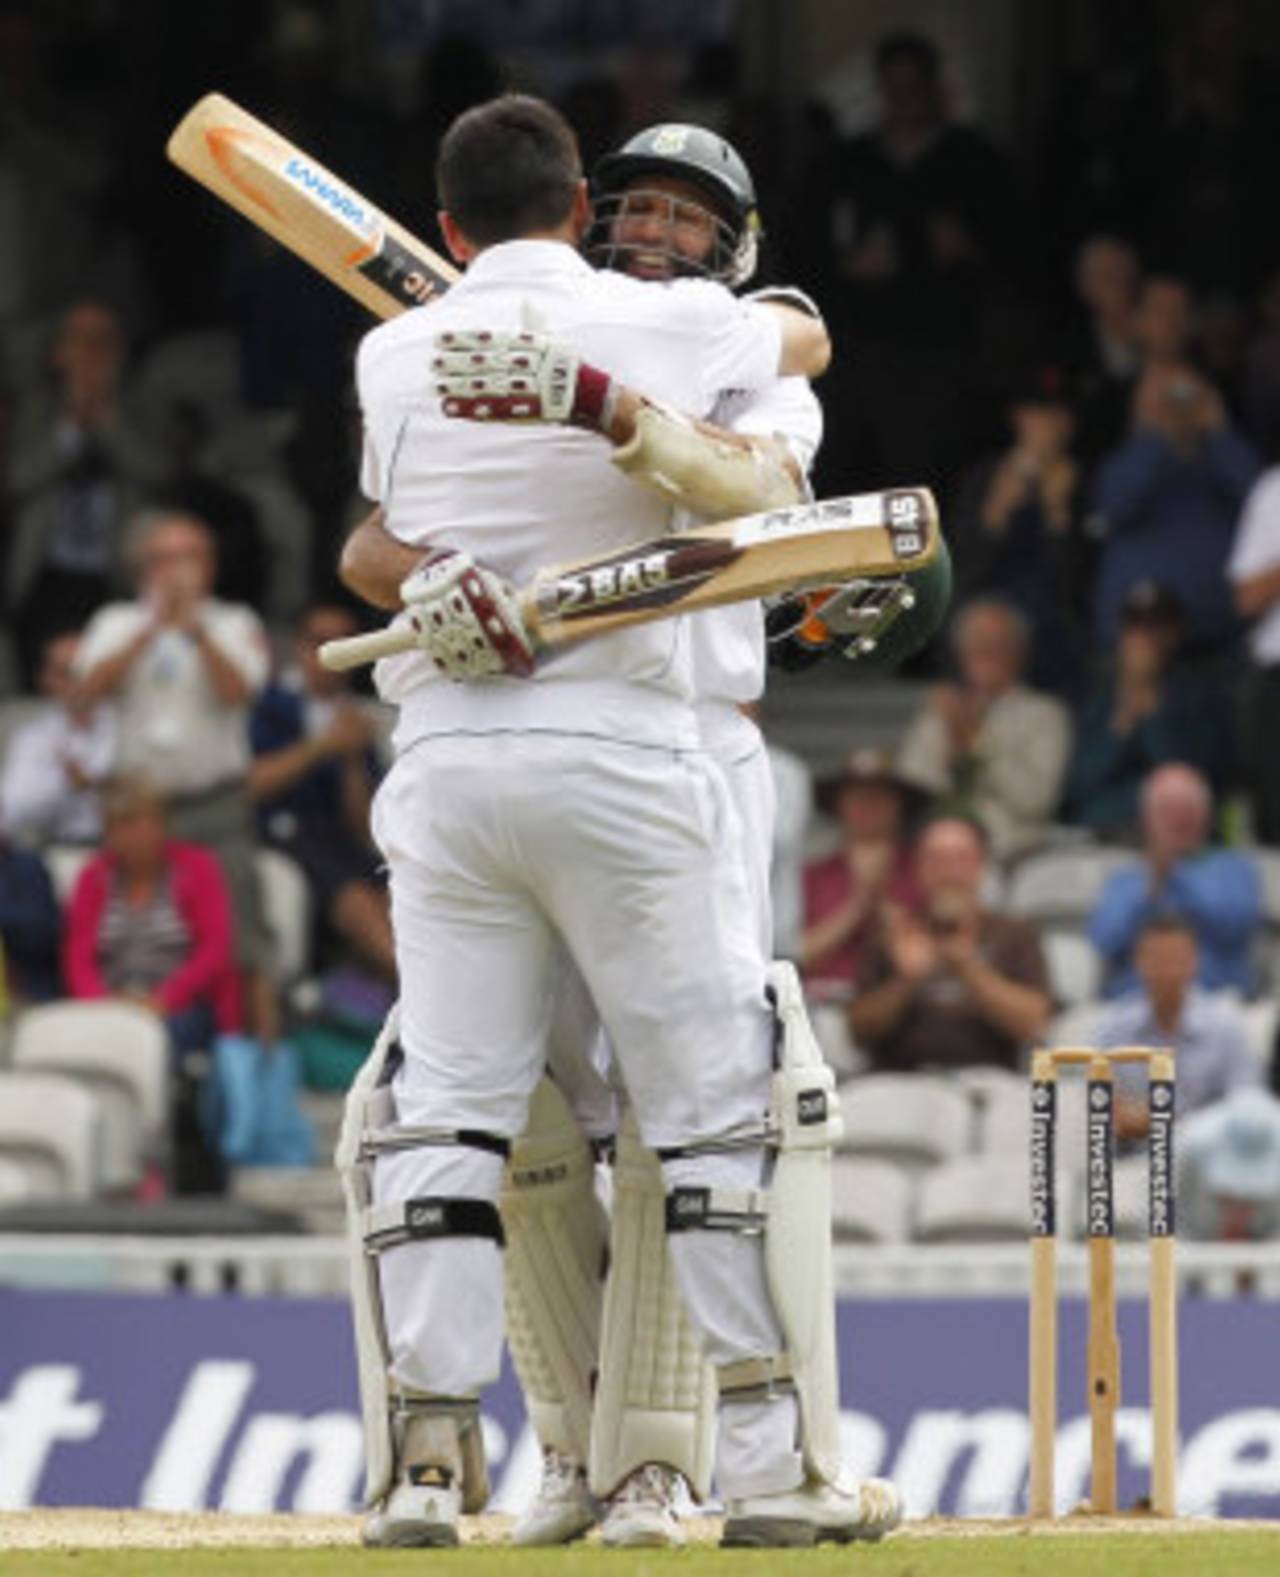 Graeme Smith is congratulated by Hashim Amla, England v South Africa, 1st Investec Test, 3rd day, The Oval, July 21, 2012